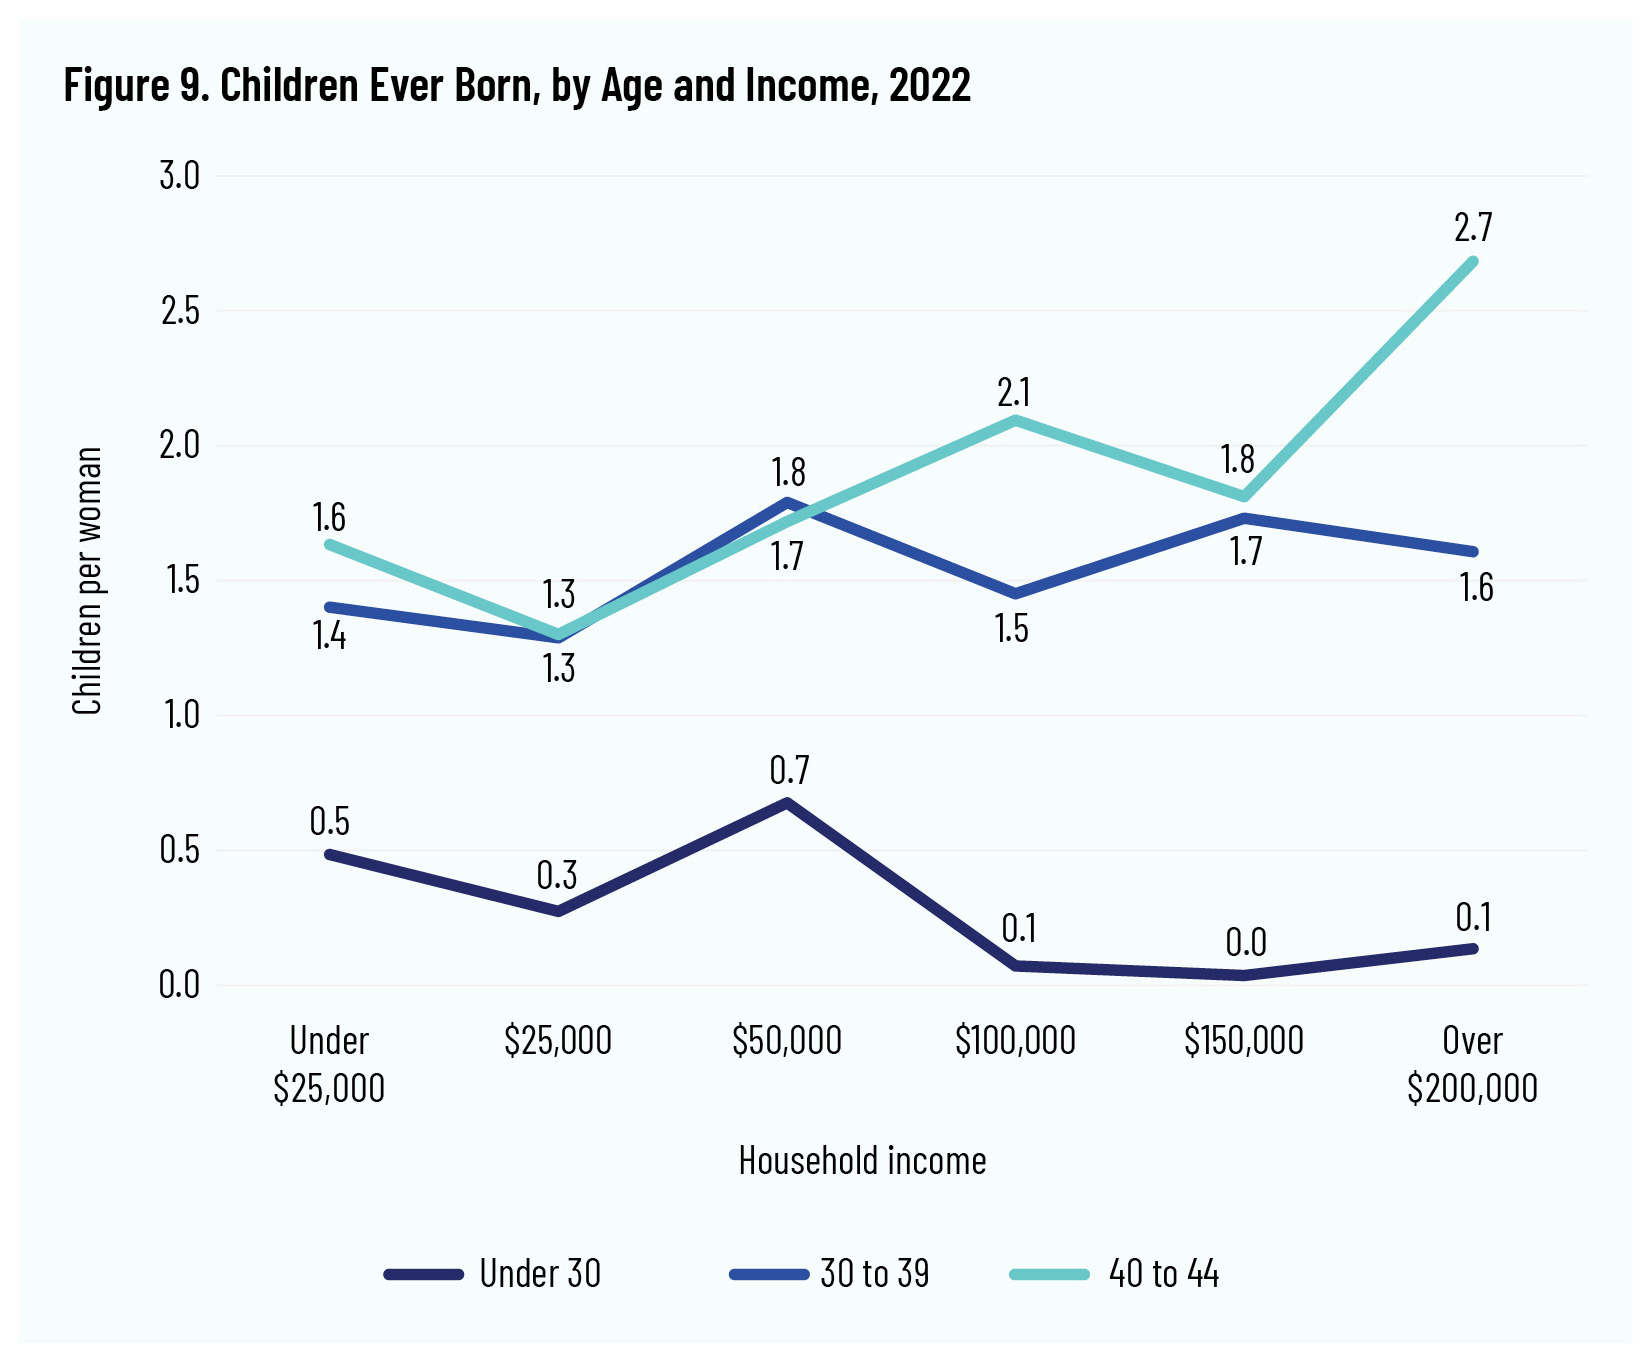 Figure 9. Children Ever Born, by Age and Income, 2022